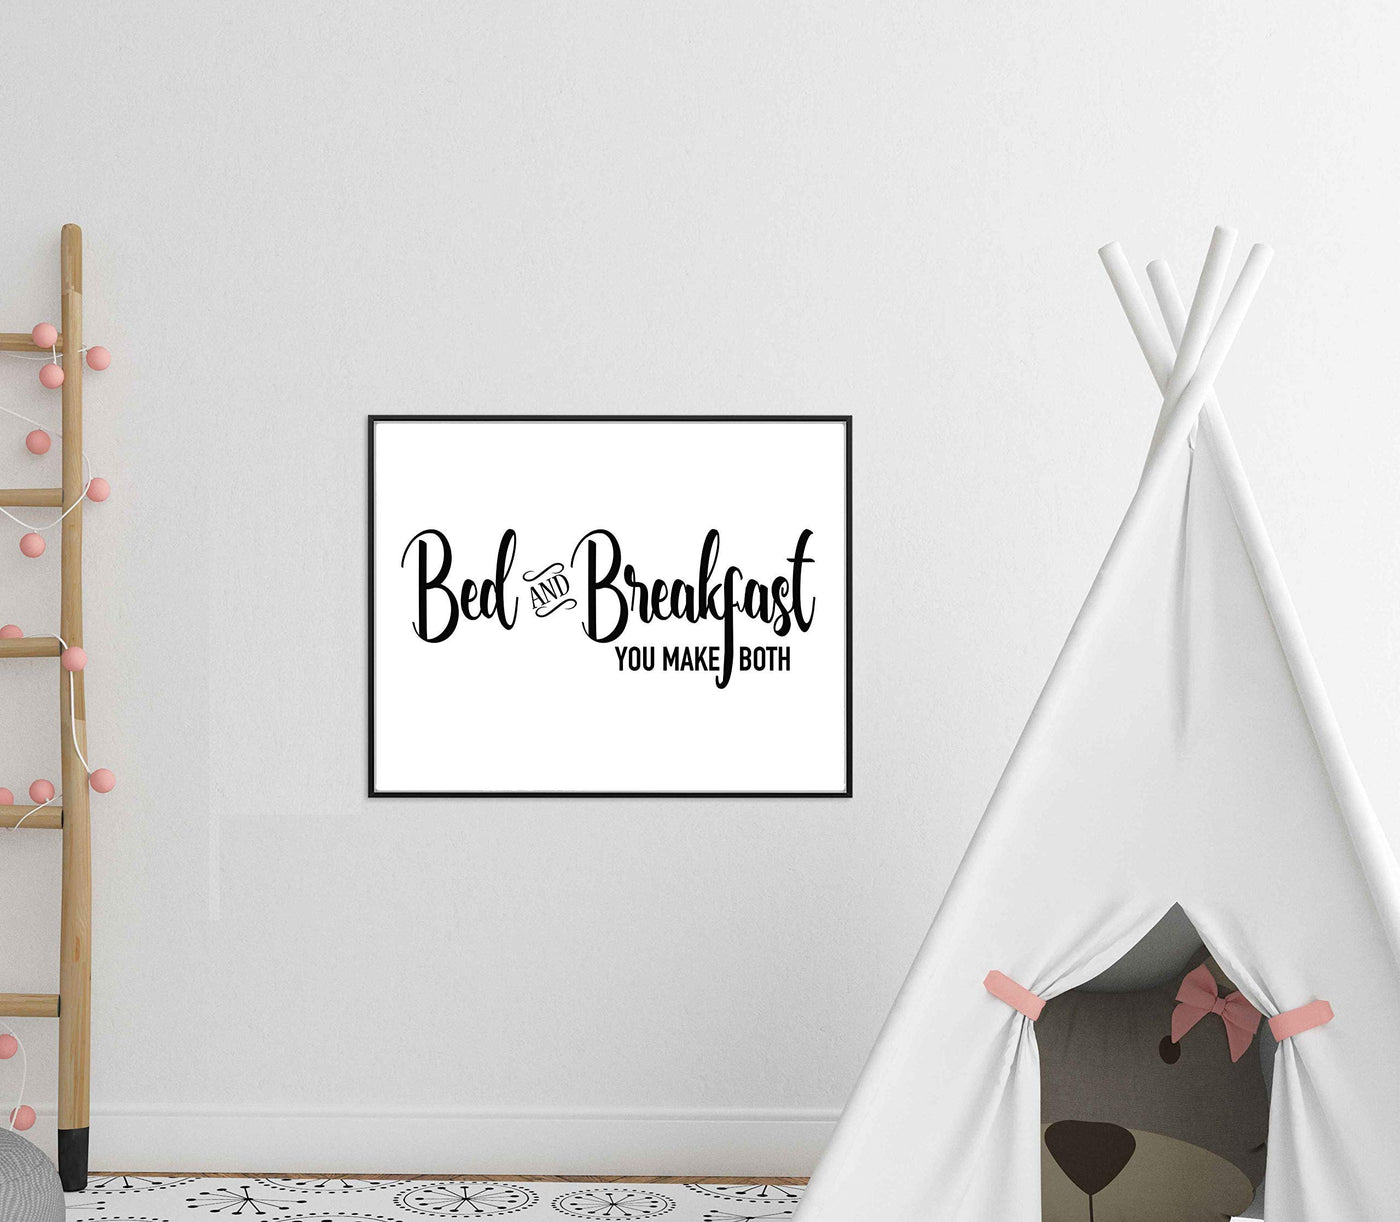 Bed & Breakfast-You Make Both- Funny Welcome Sign- 14 x 11" Modern Typographic Wall Art Print-Ready to Frame. Ideal Decor for Any Guest House-Cabin-Lake House. Perfect Humorous Sign for B&B!